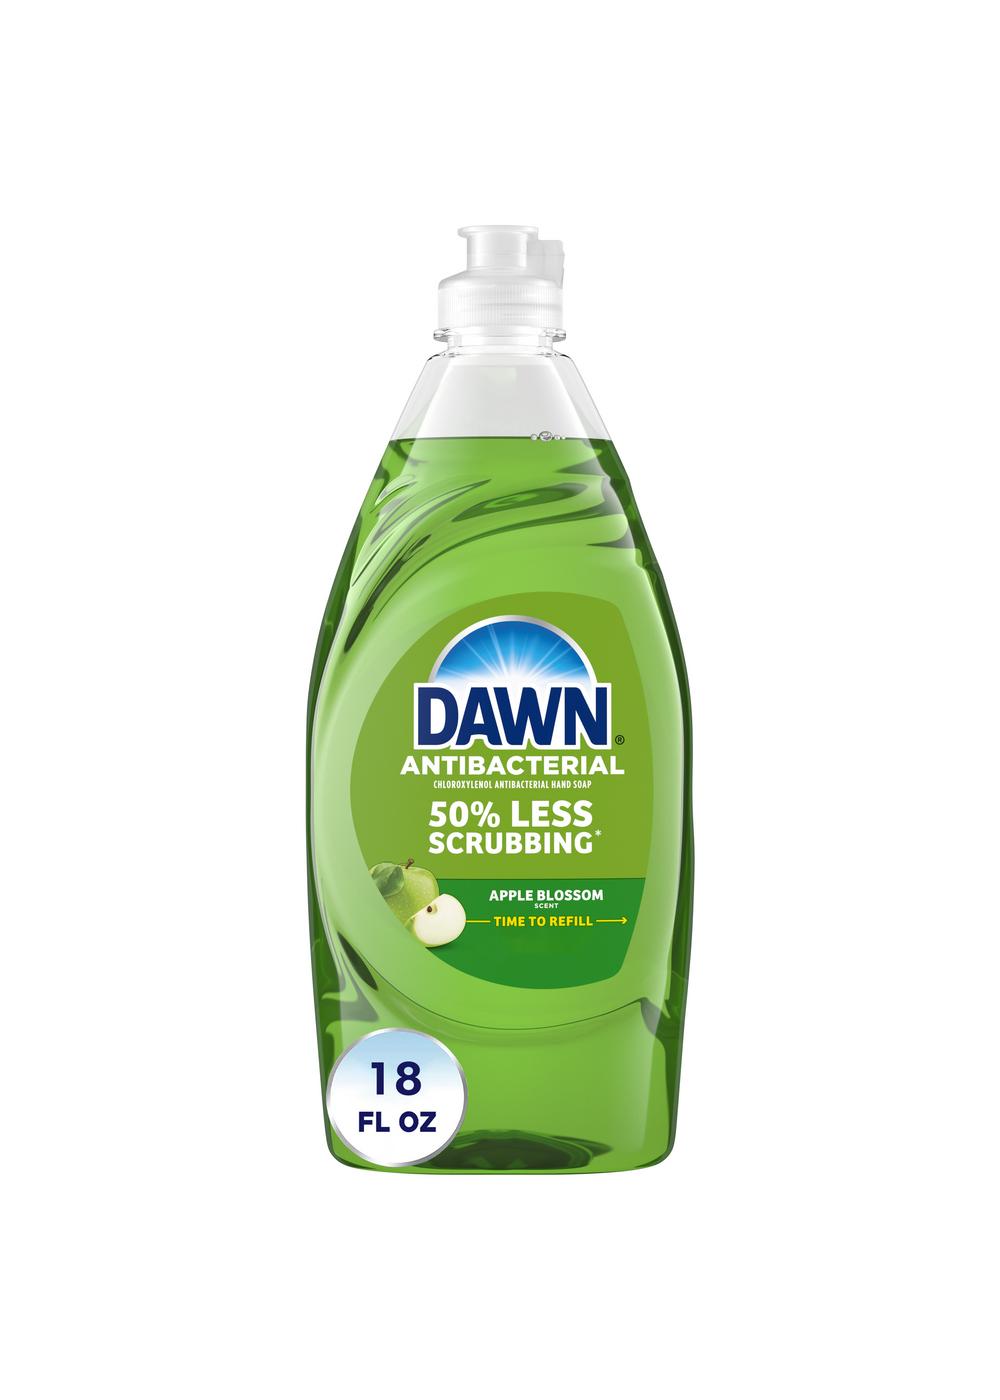 Dawn Ultra Antibacterial Hand Soap - Apple Blossom; image 1 of 6